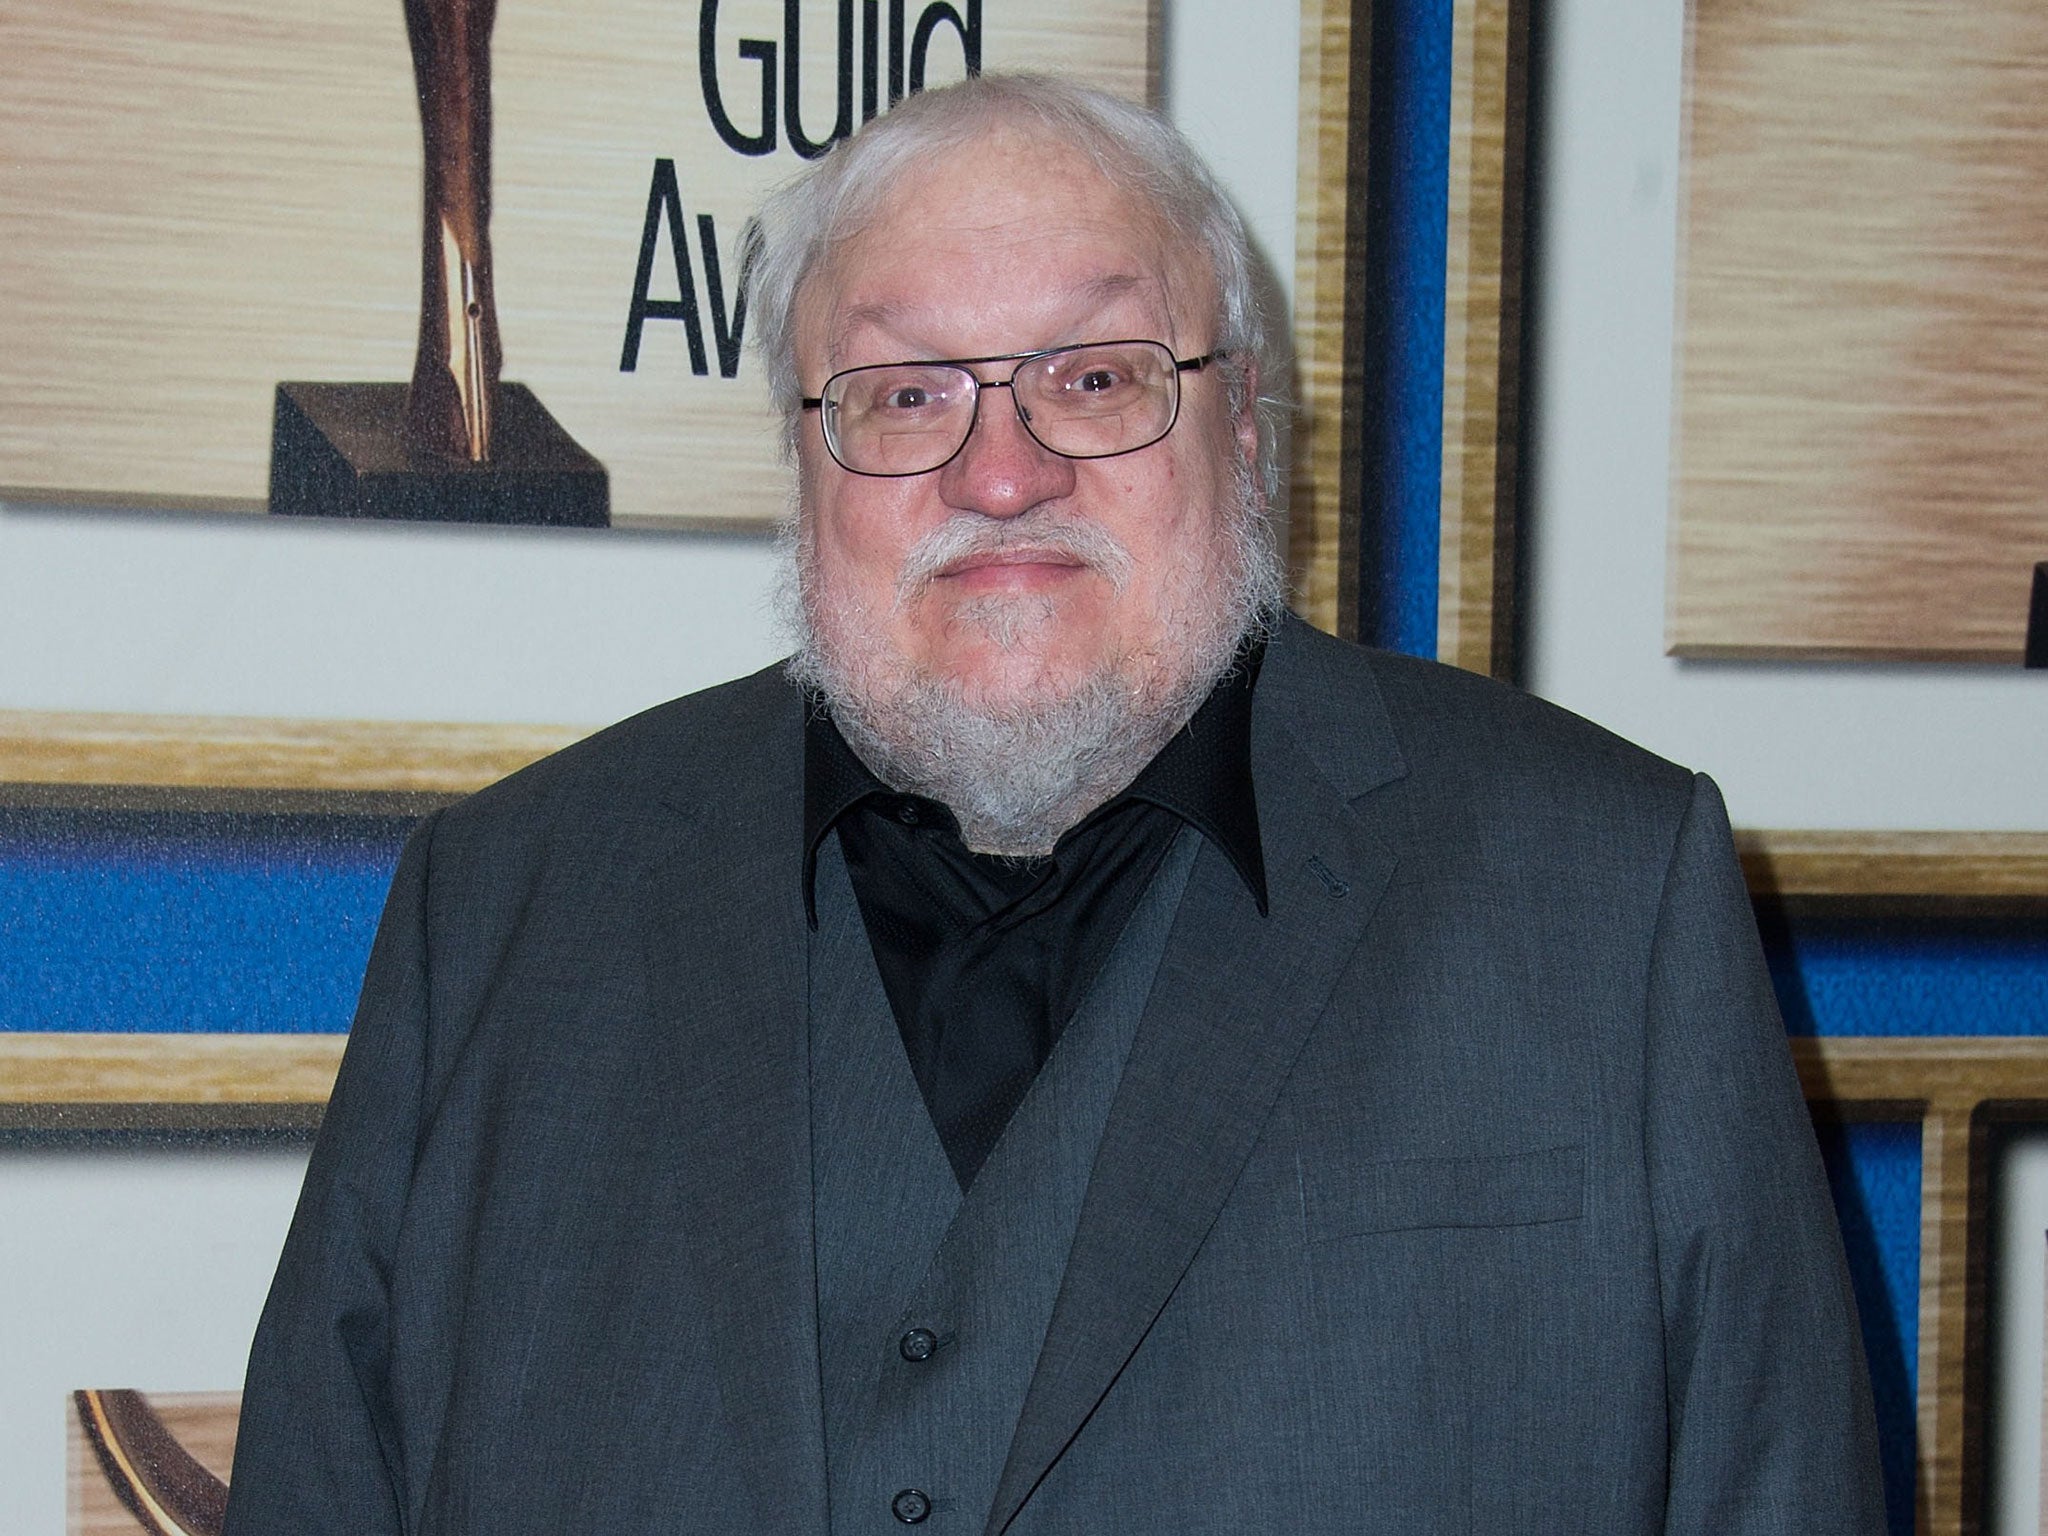 Game of Thrones author George RR Martin often has to defend his books from criticism